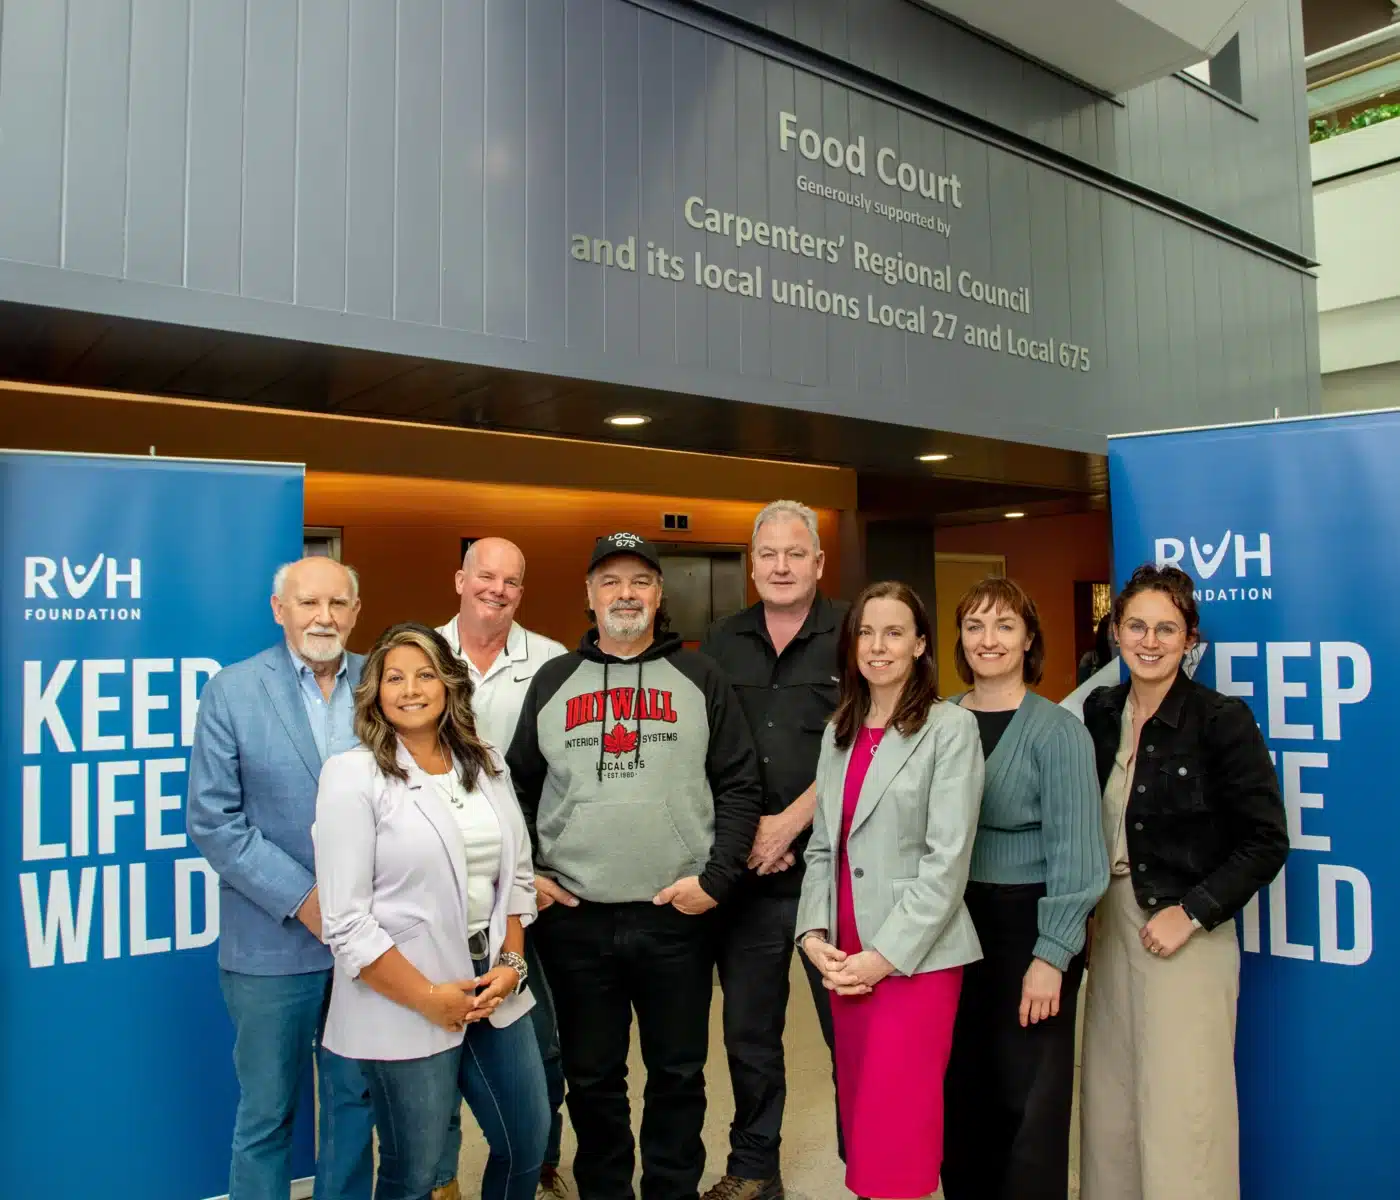 Representatives from the Carpenter's Regional Council and it's local union's 27 and 675 gather underneath their recognition sign in RVH's Food Court alongside members of Team RVH.